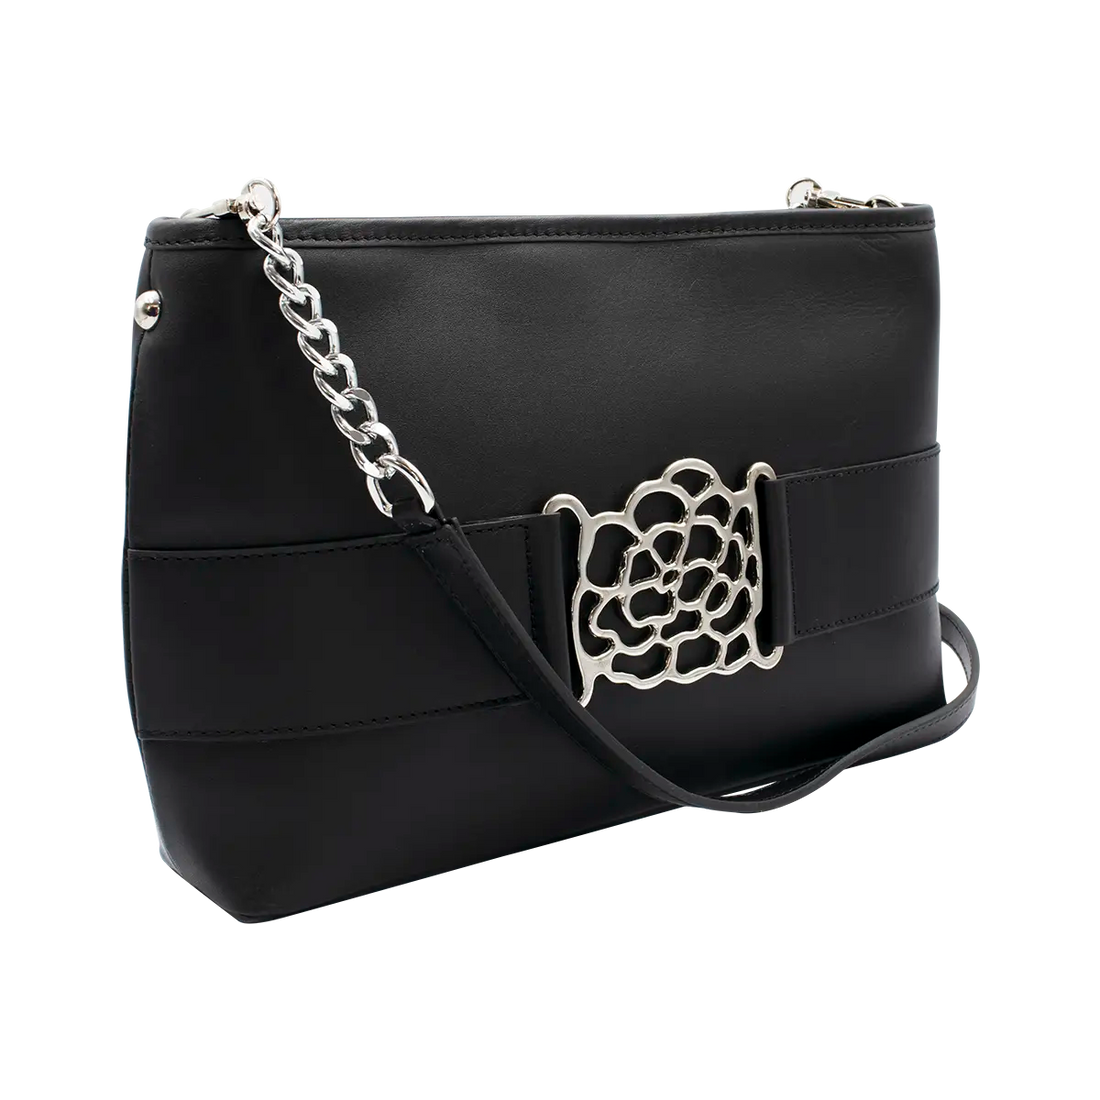 small black leather shoulder bag with metal accent. Fashion accessory for women in San Diego, CA.